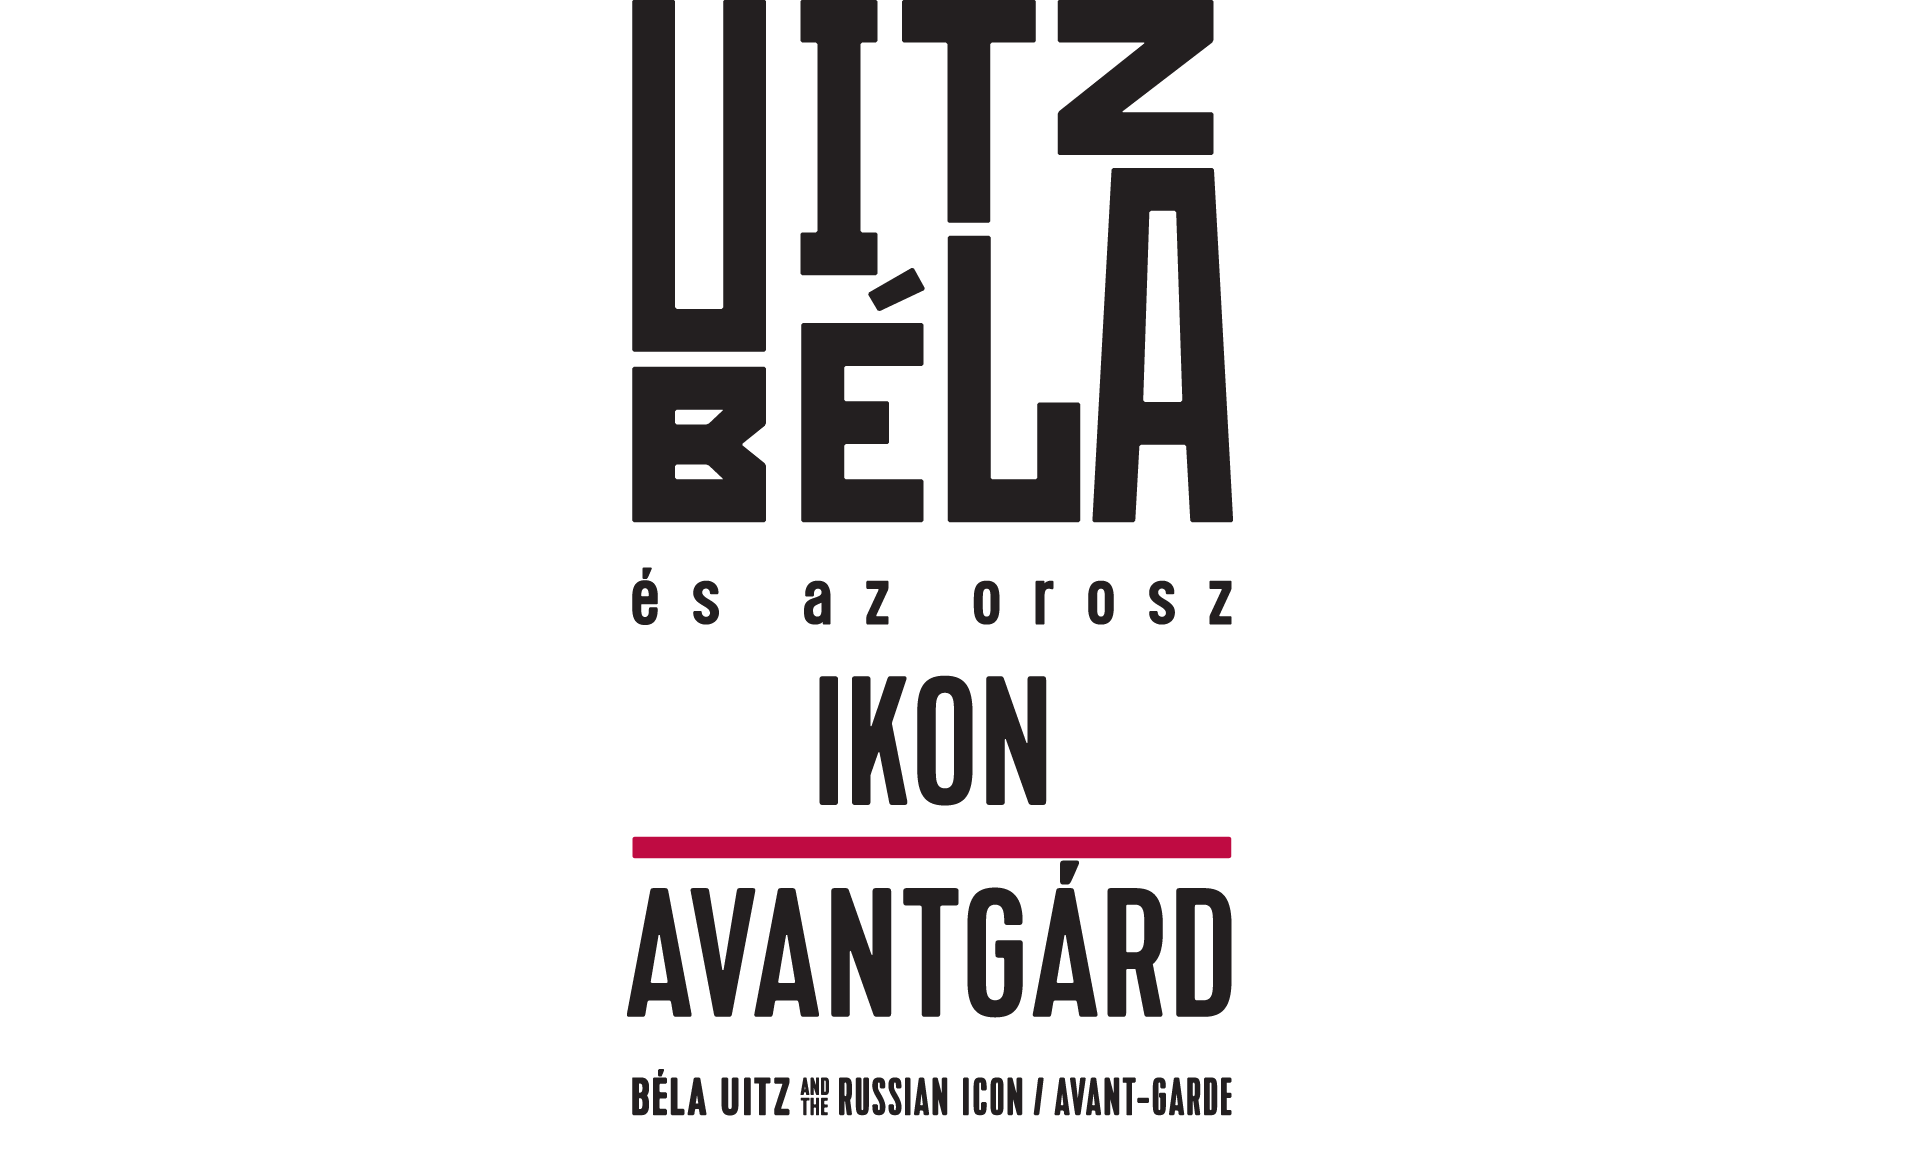 Béla Uitz and the Russian Icon/Avant-garde